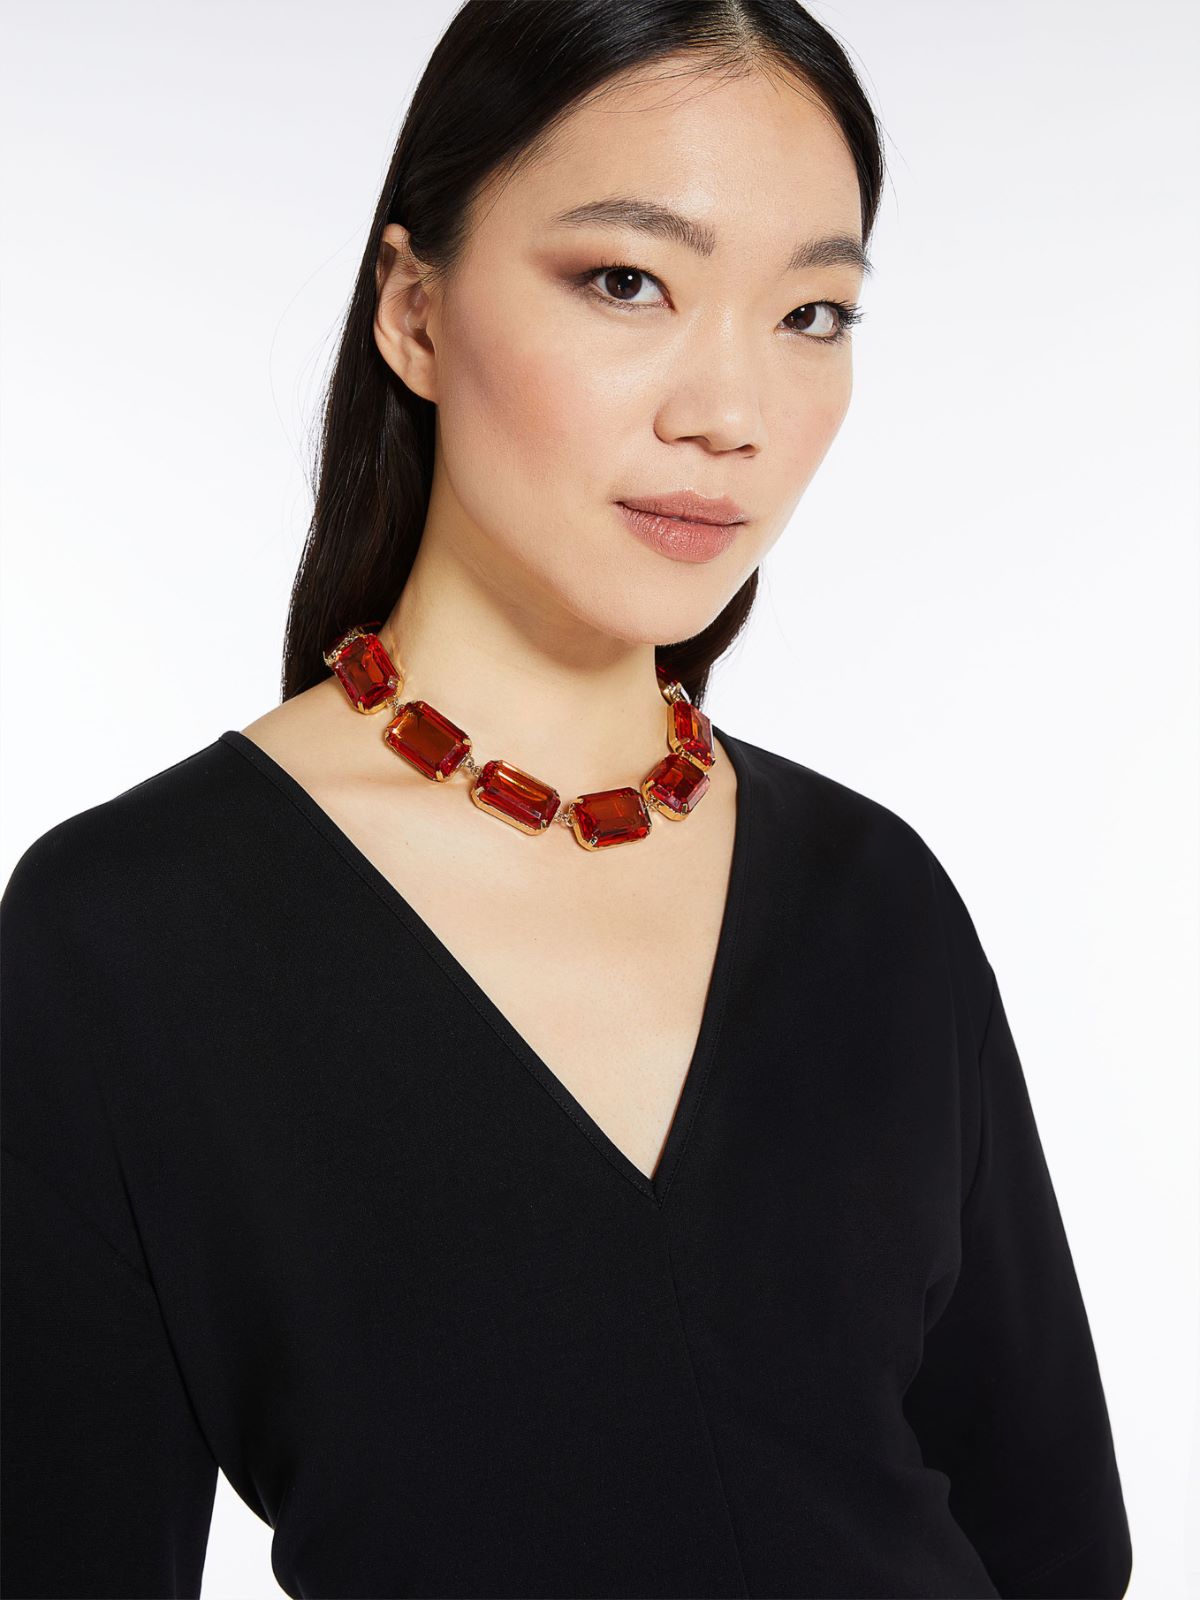 Necklace with bezels - YELLOW - Weekend Max Mara - 3